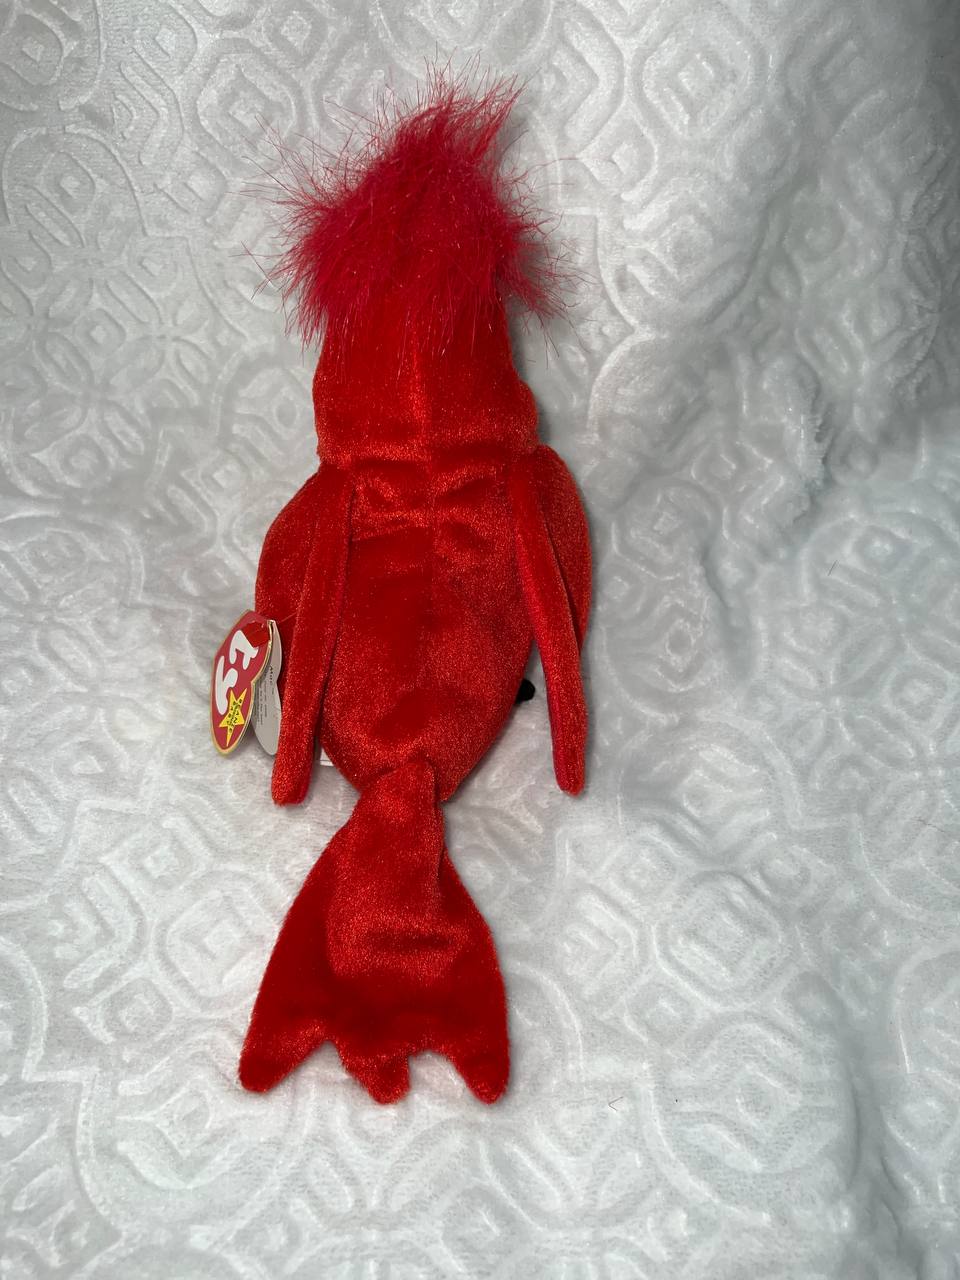 *RARE* MINT Mac 1998 Beanie Baby With Tag in Pristine Condition